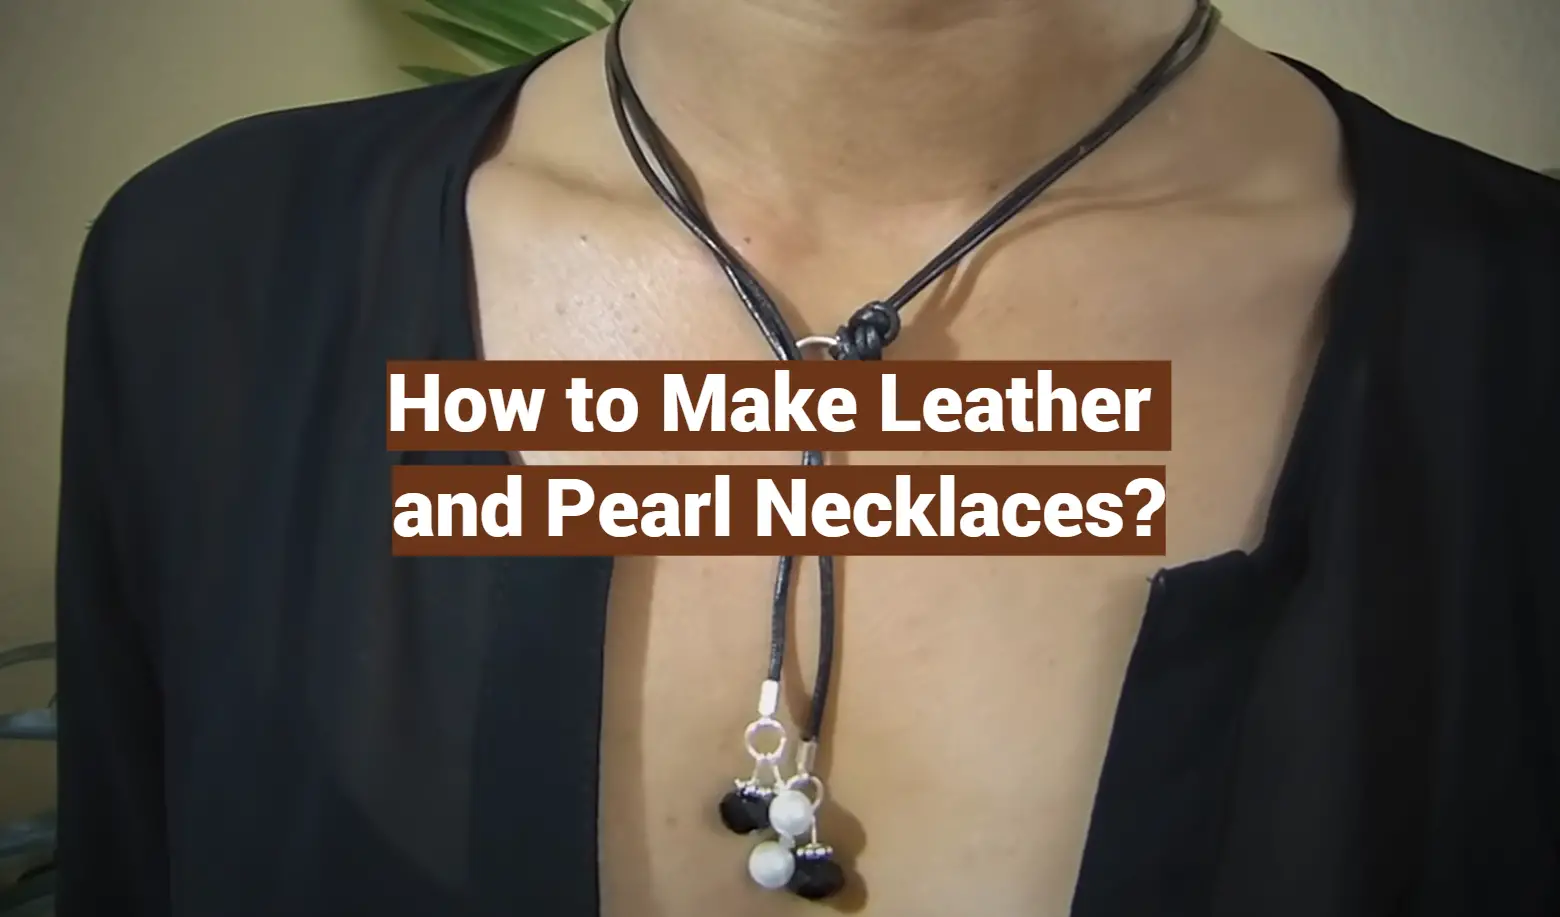 How to Make Leather and Pearl Necklaces?